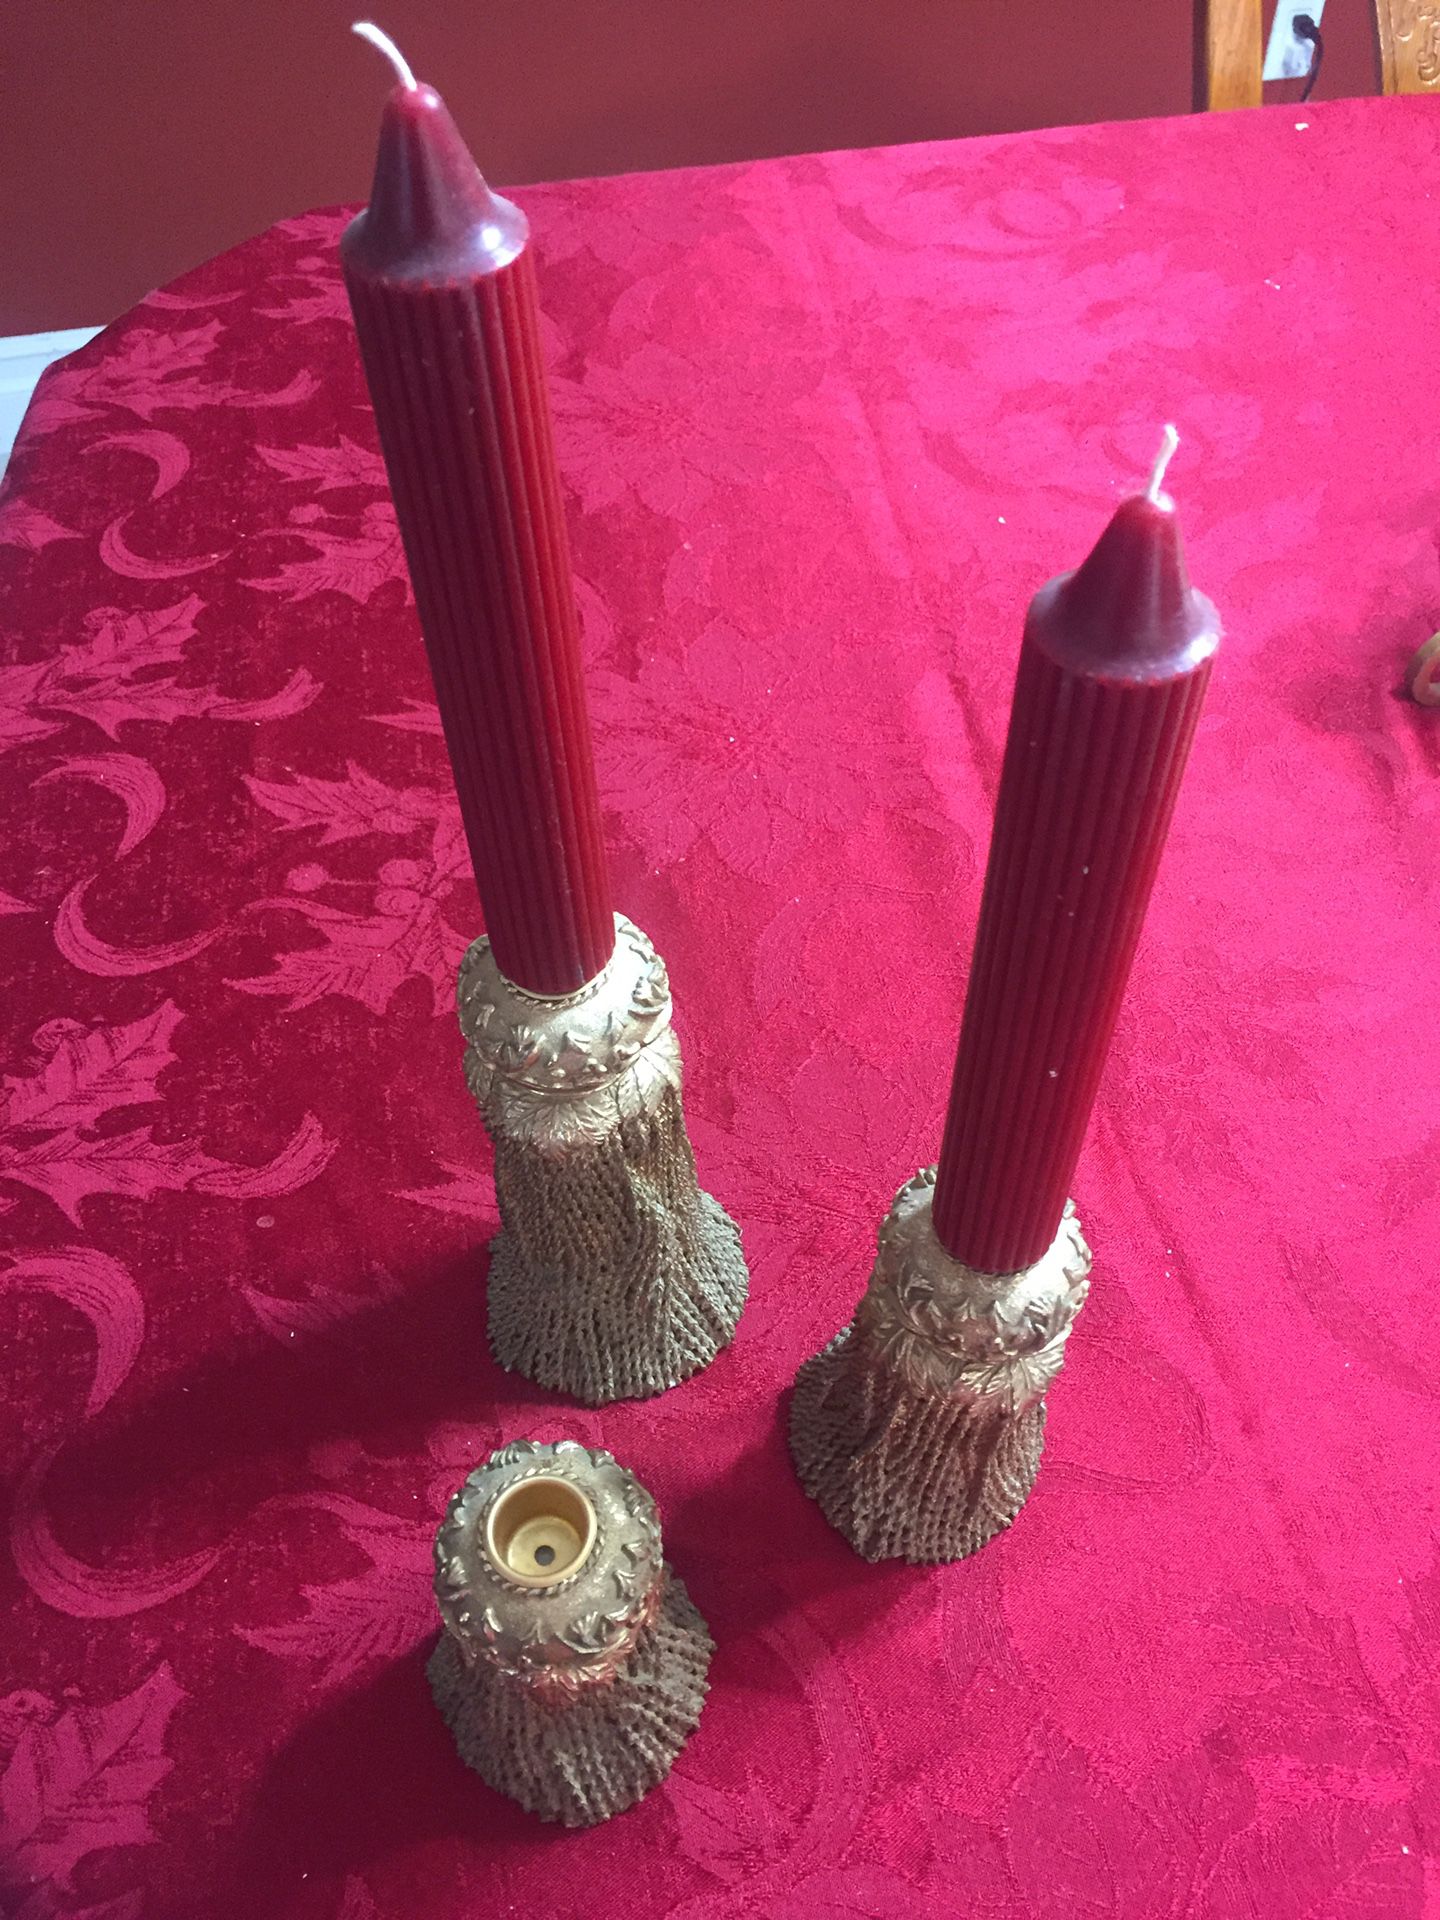 3 Candle holders and 2 candles